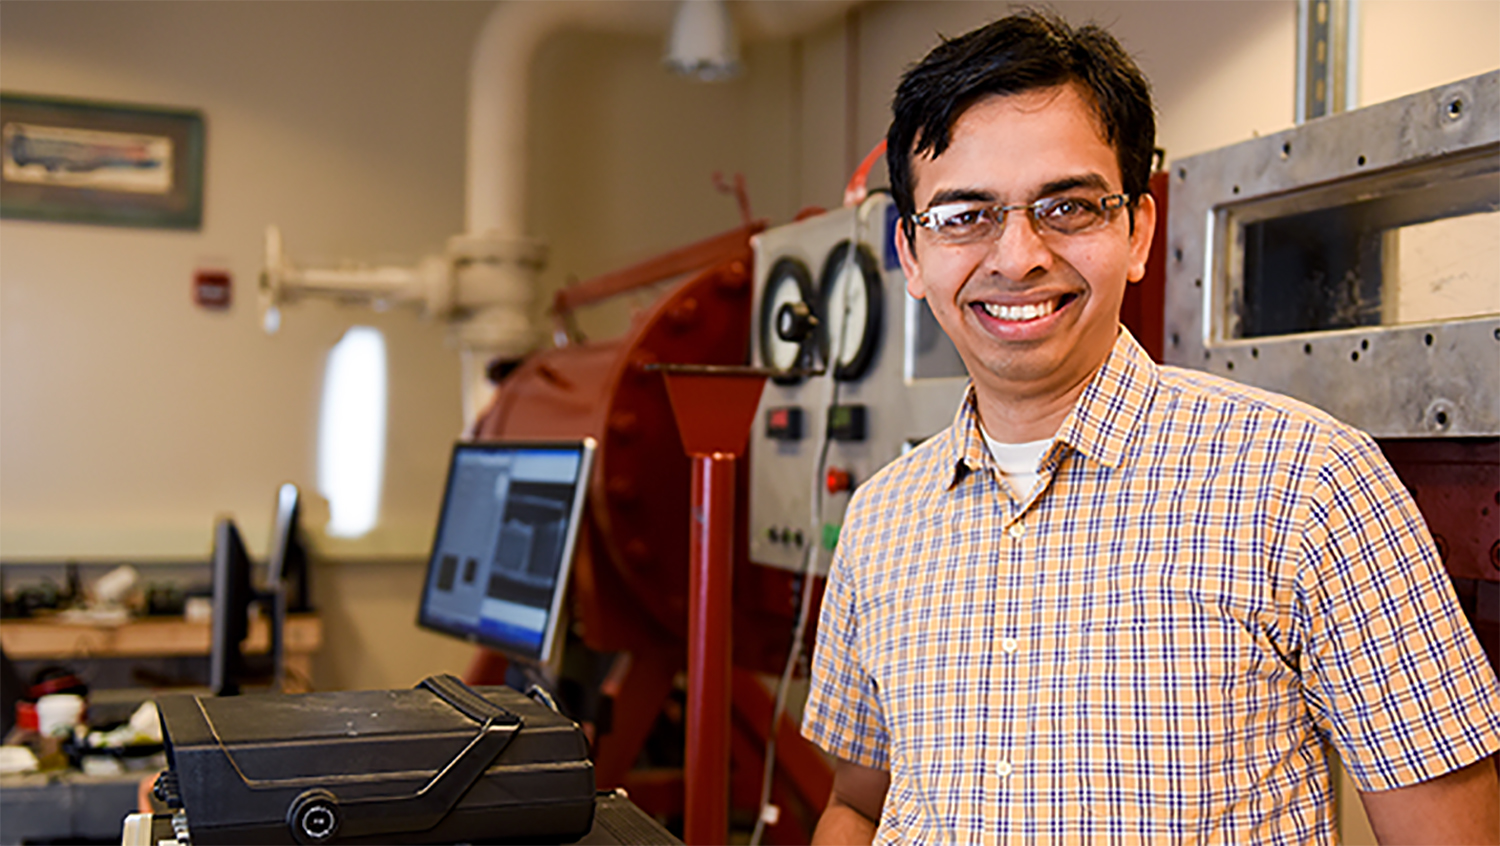 Venkat Narayanaswamy poses for a photograph while standing in his lab.